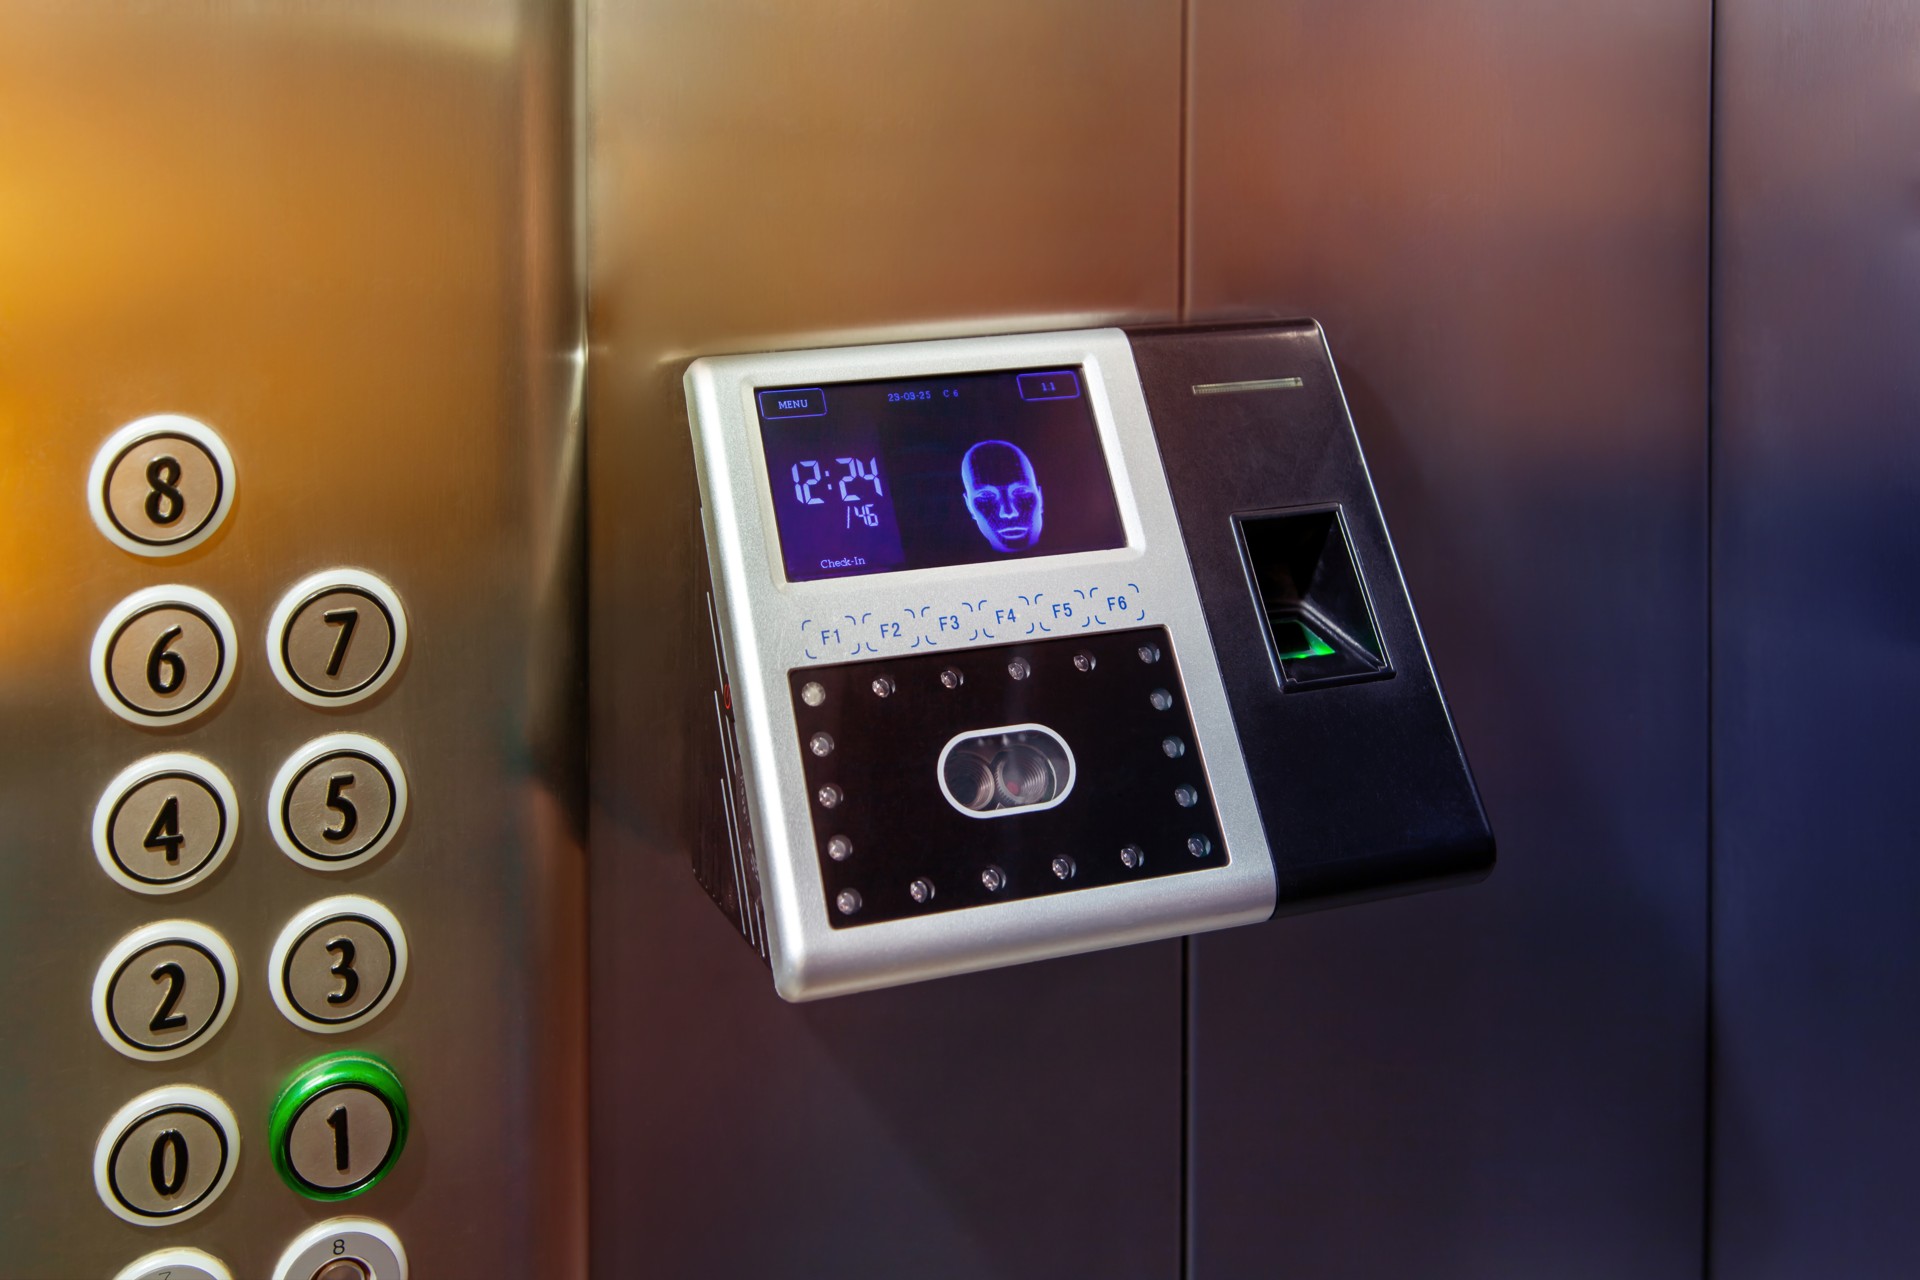 Types of Access Control Systems